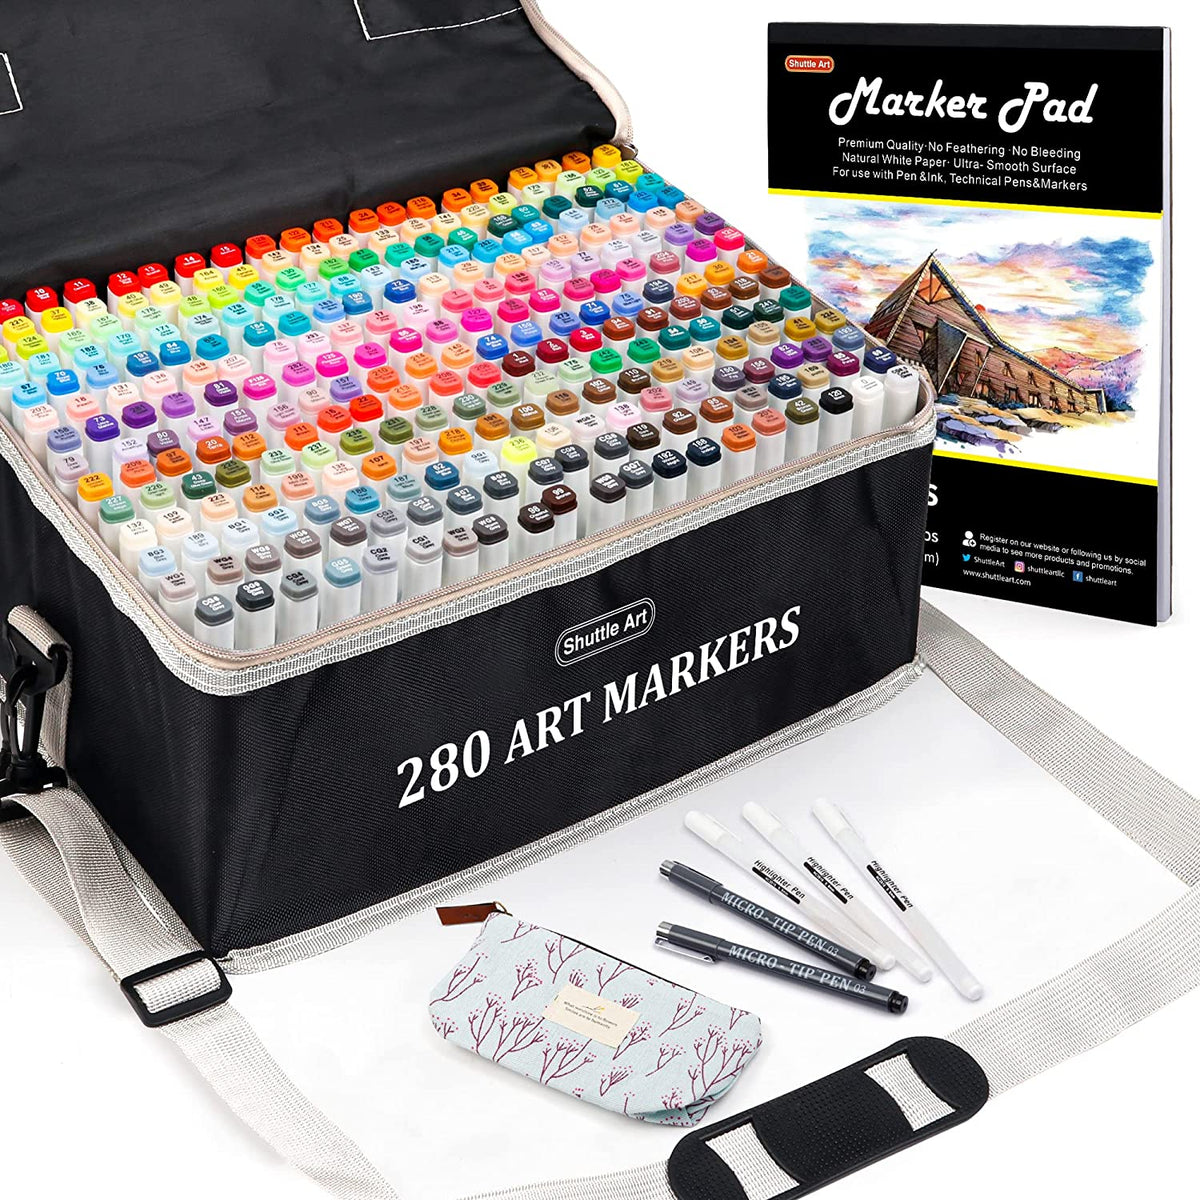 60 Markers Artist Set Set of 60 Marker Pens, Twin Dual Tips Sketch, Manga  Anime, Drawing, Adult Book Coloring, Bible Journaling Free Case 